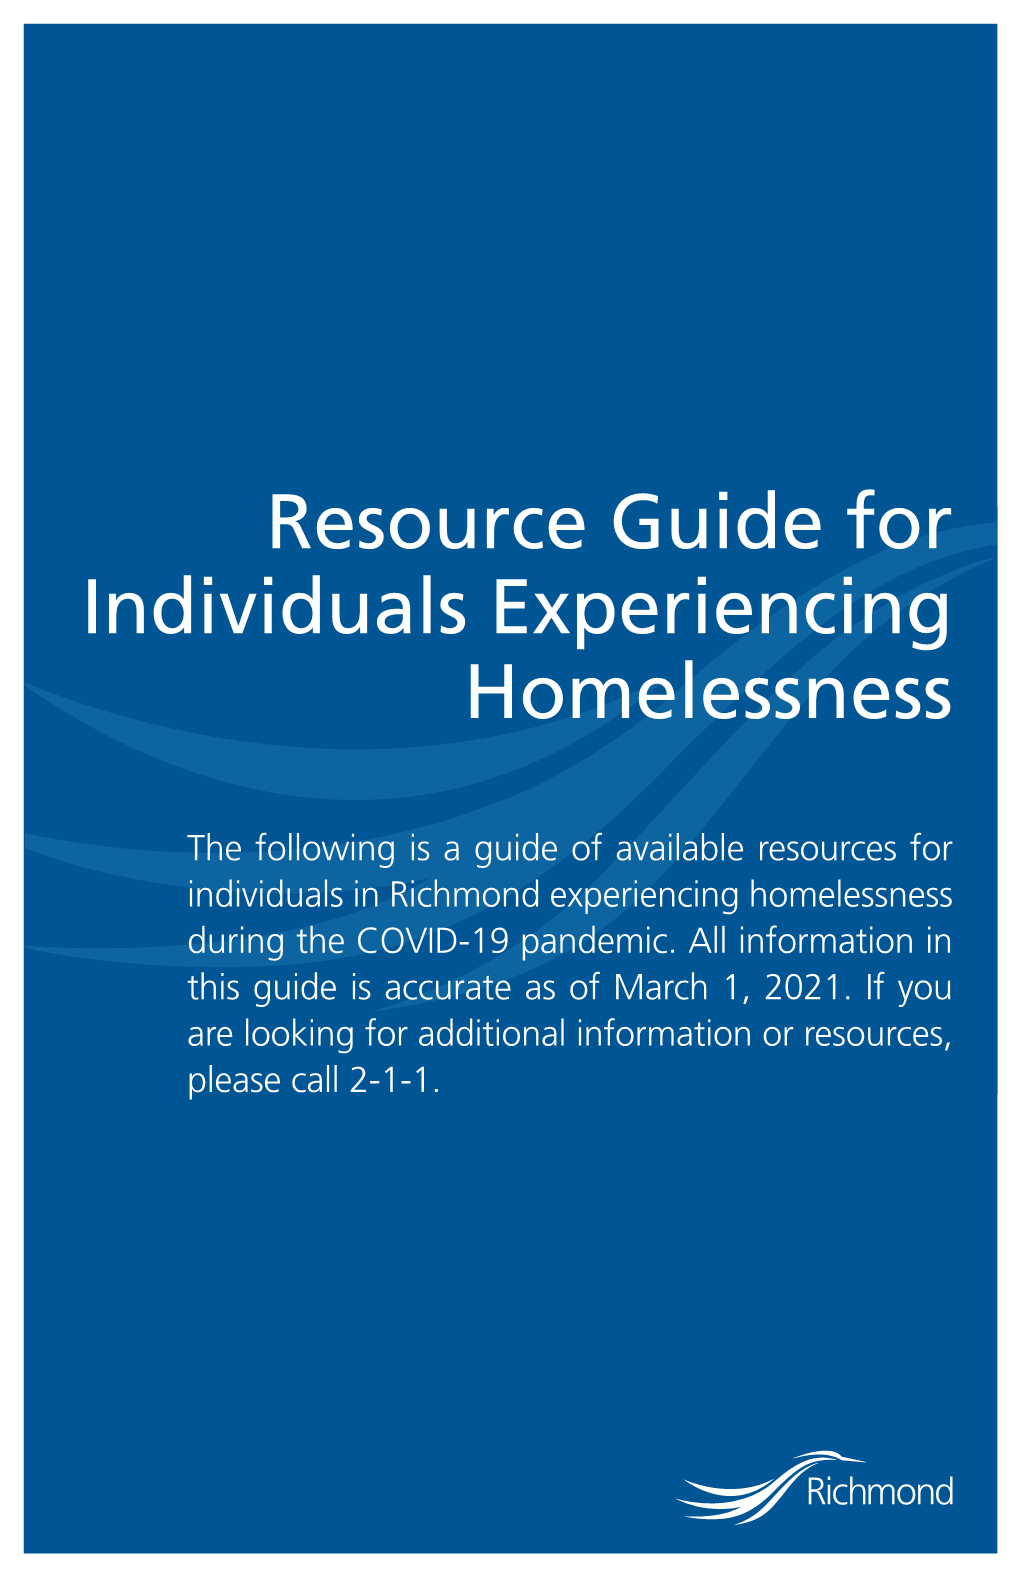 Resource Guide for Individuals Experiencing Homelessness